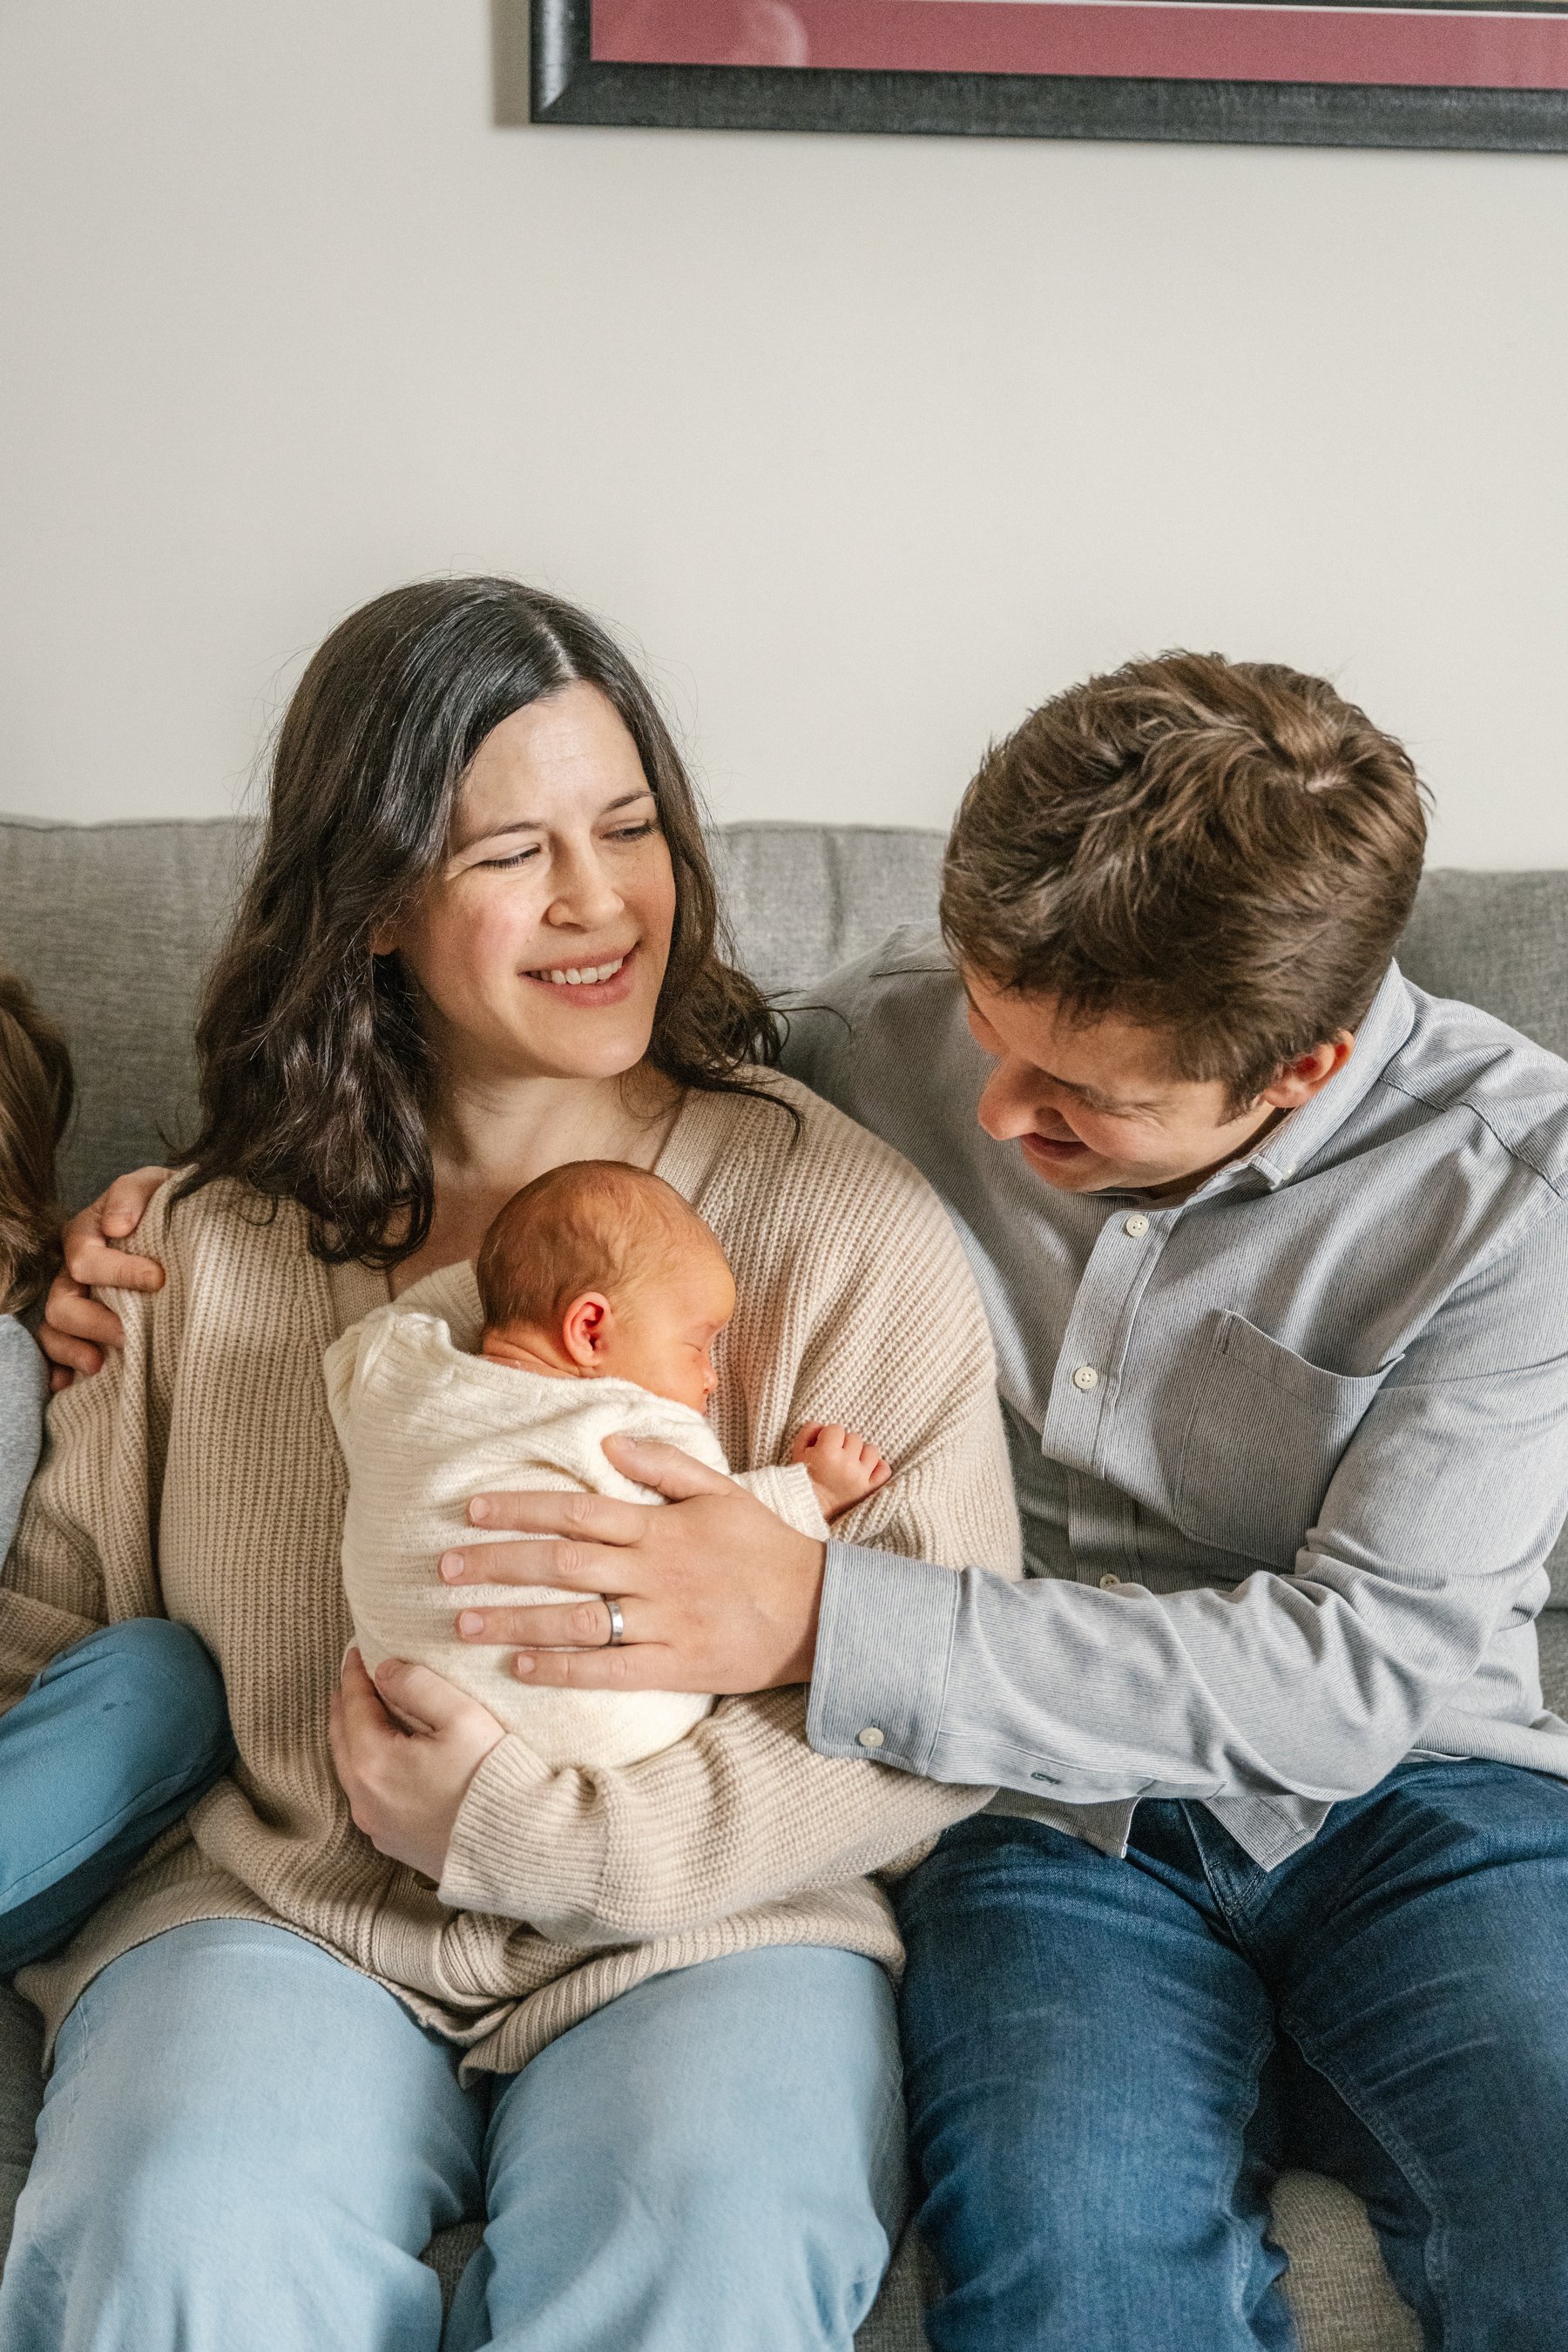   At home family photo of mom and dad sitting on a couch,&nbsp; playing with their newborn baby. Casual in-home family photoshoot inspiration #EssexCountyFamilyPhotographer #PassaicCountyFamilyPhotographer #NorthernNewJerseyFamilyPhotographer #Manhat